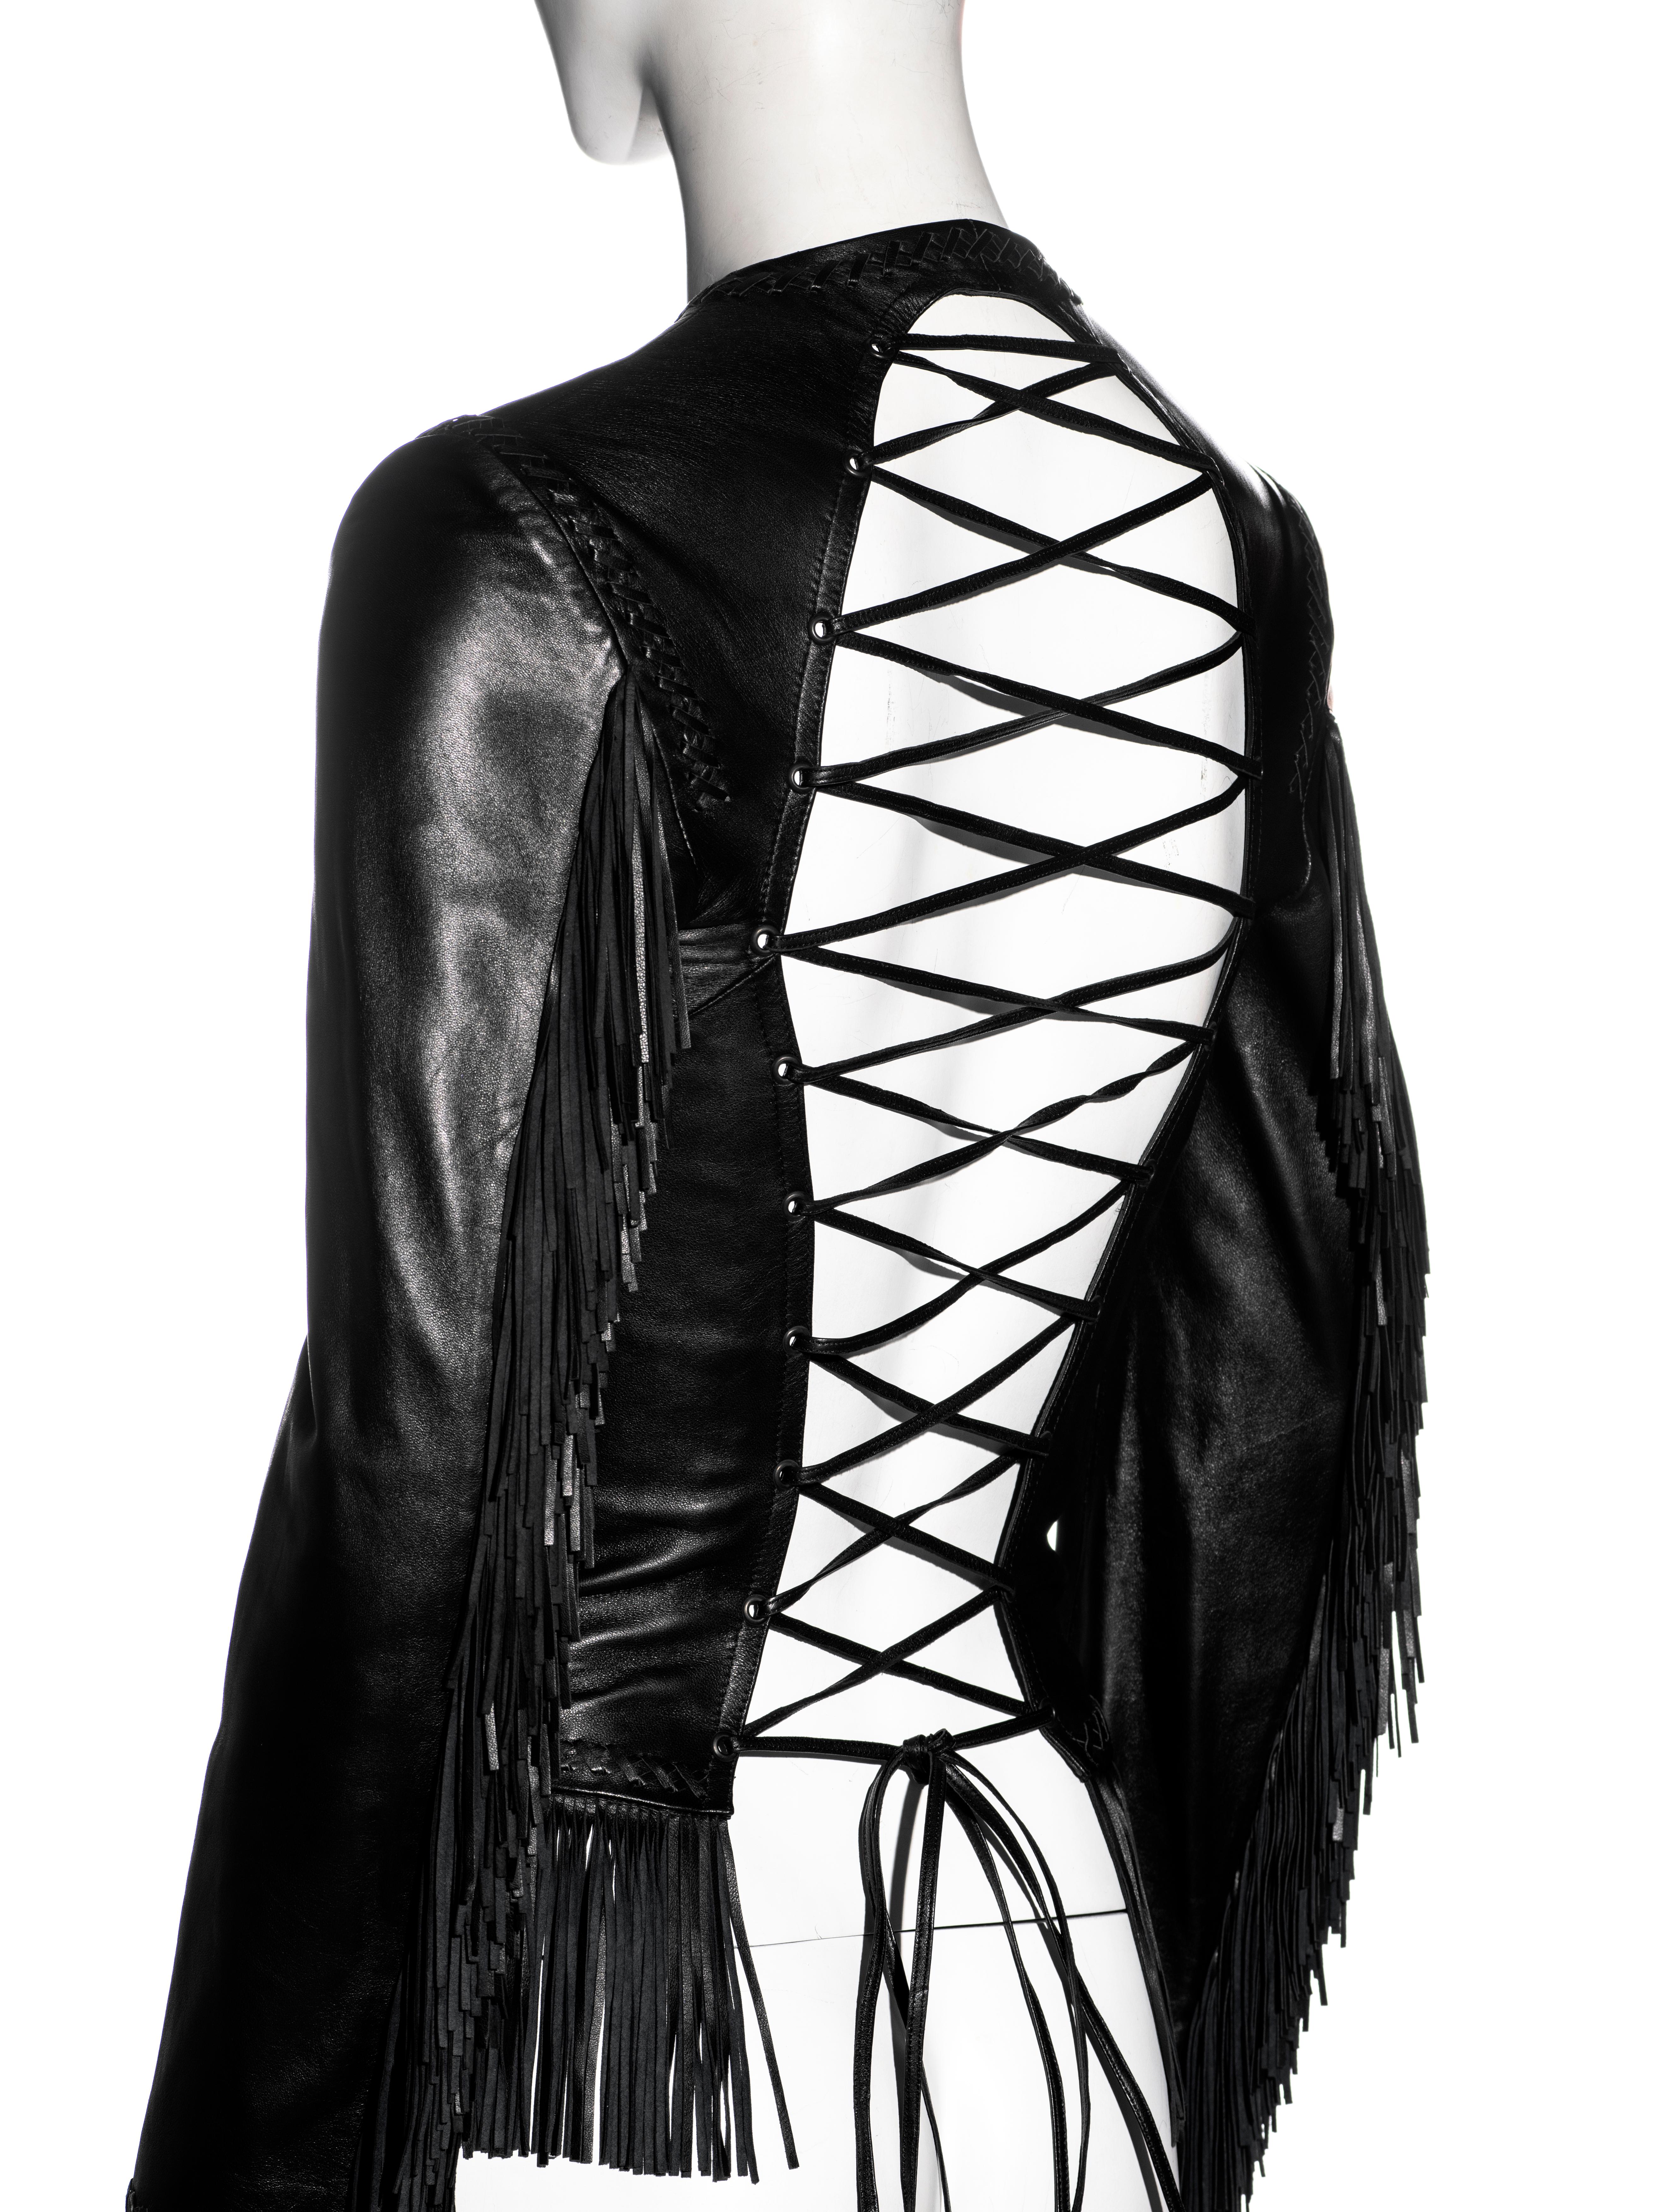 Black Gianni Versace black leather open-back jacket, ss 2002 For Sale